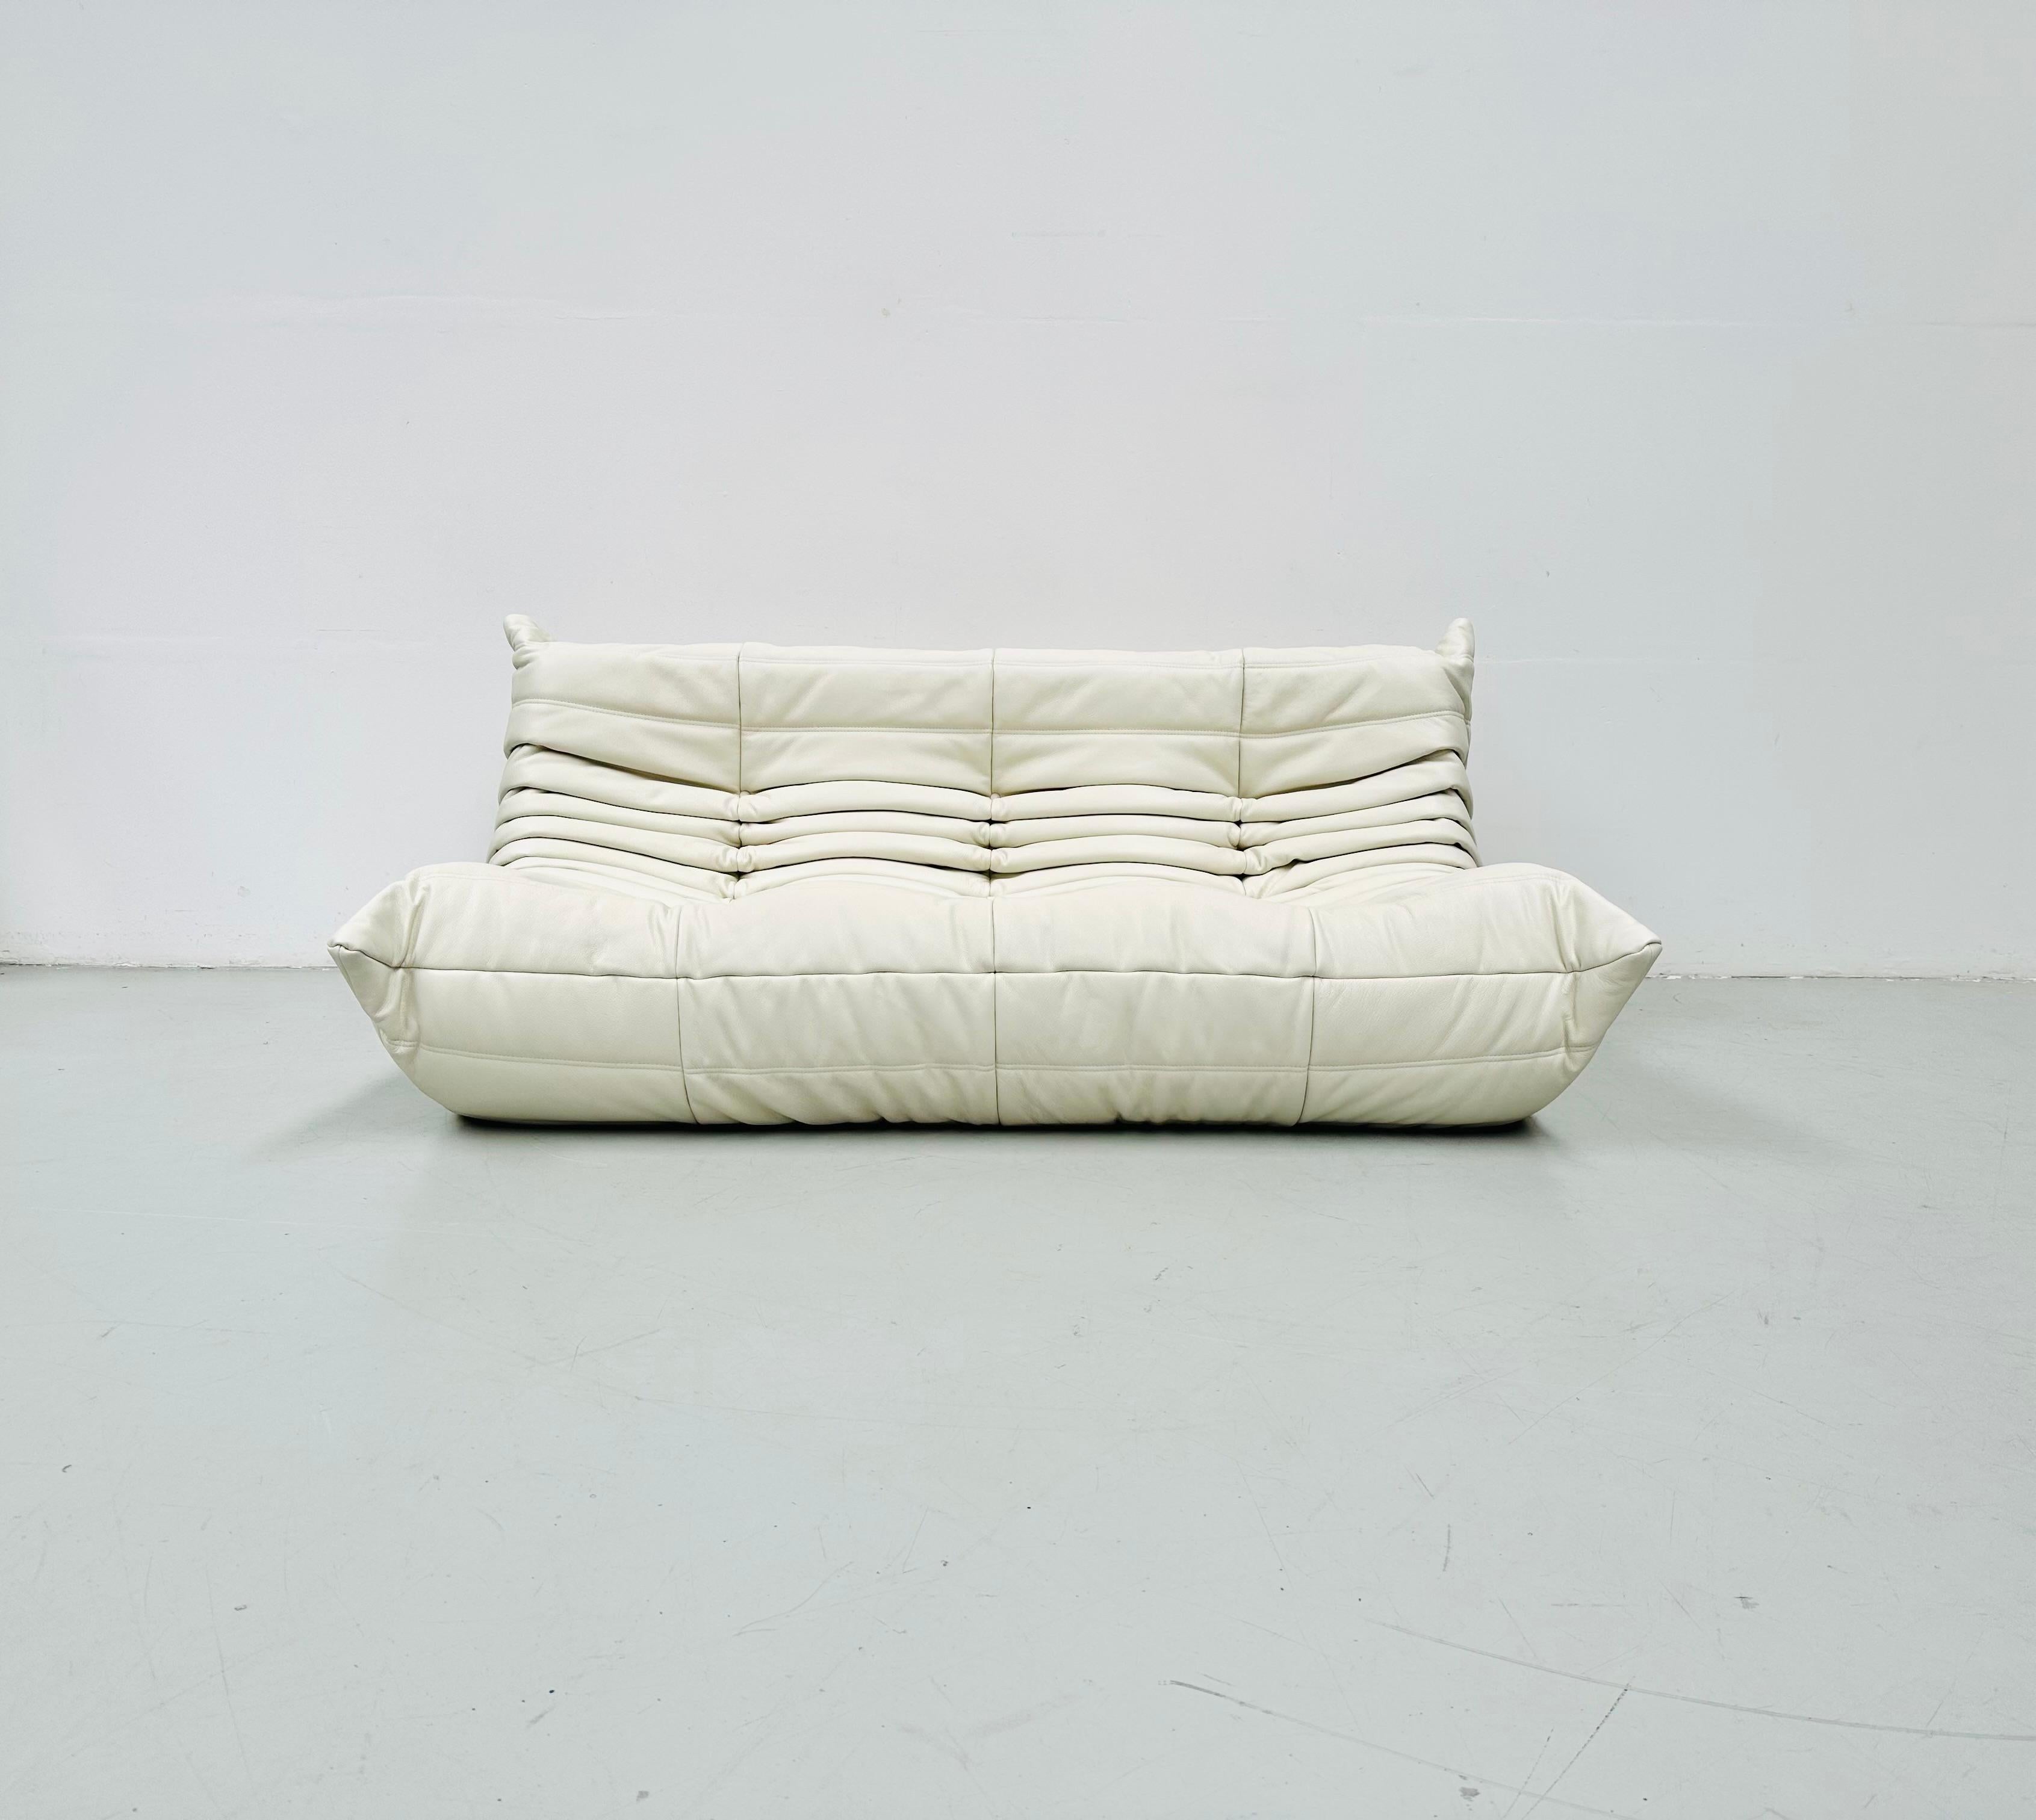 French Vintage Togo Sofa in White Leather by Michel Ducaroy for Ligne Roset. 1